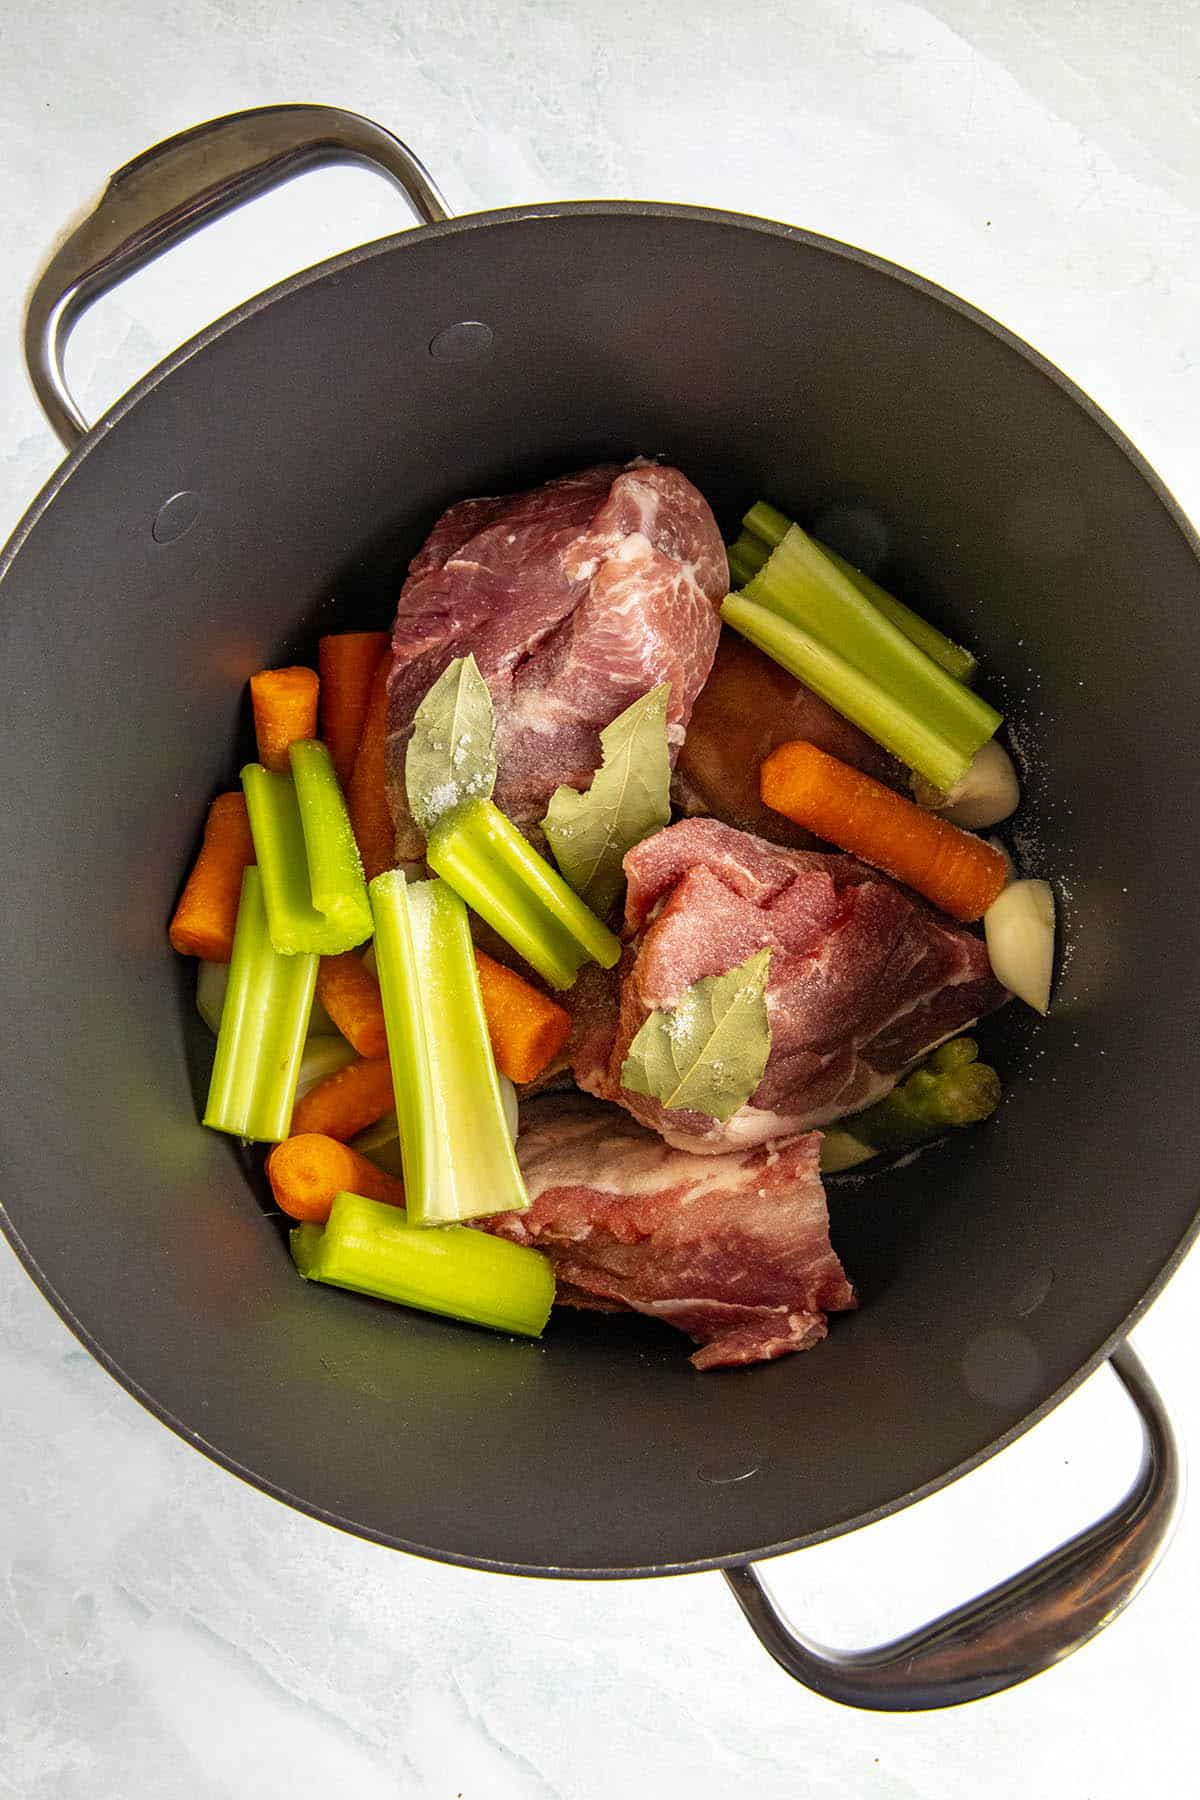 Meat and veggies in a pot to make pozole